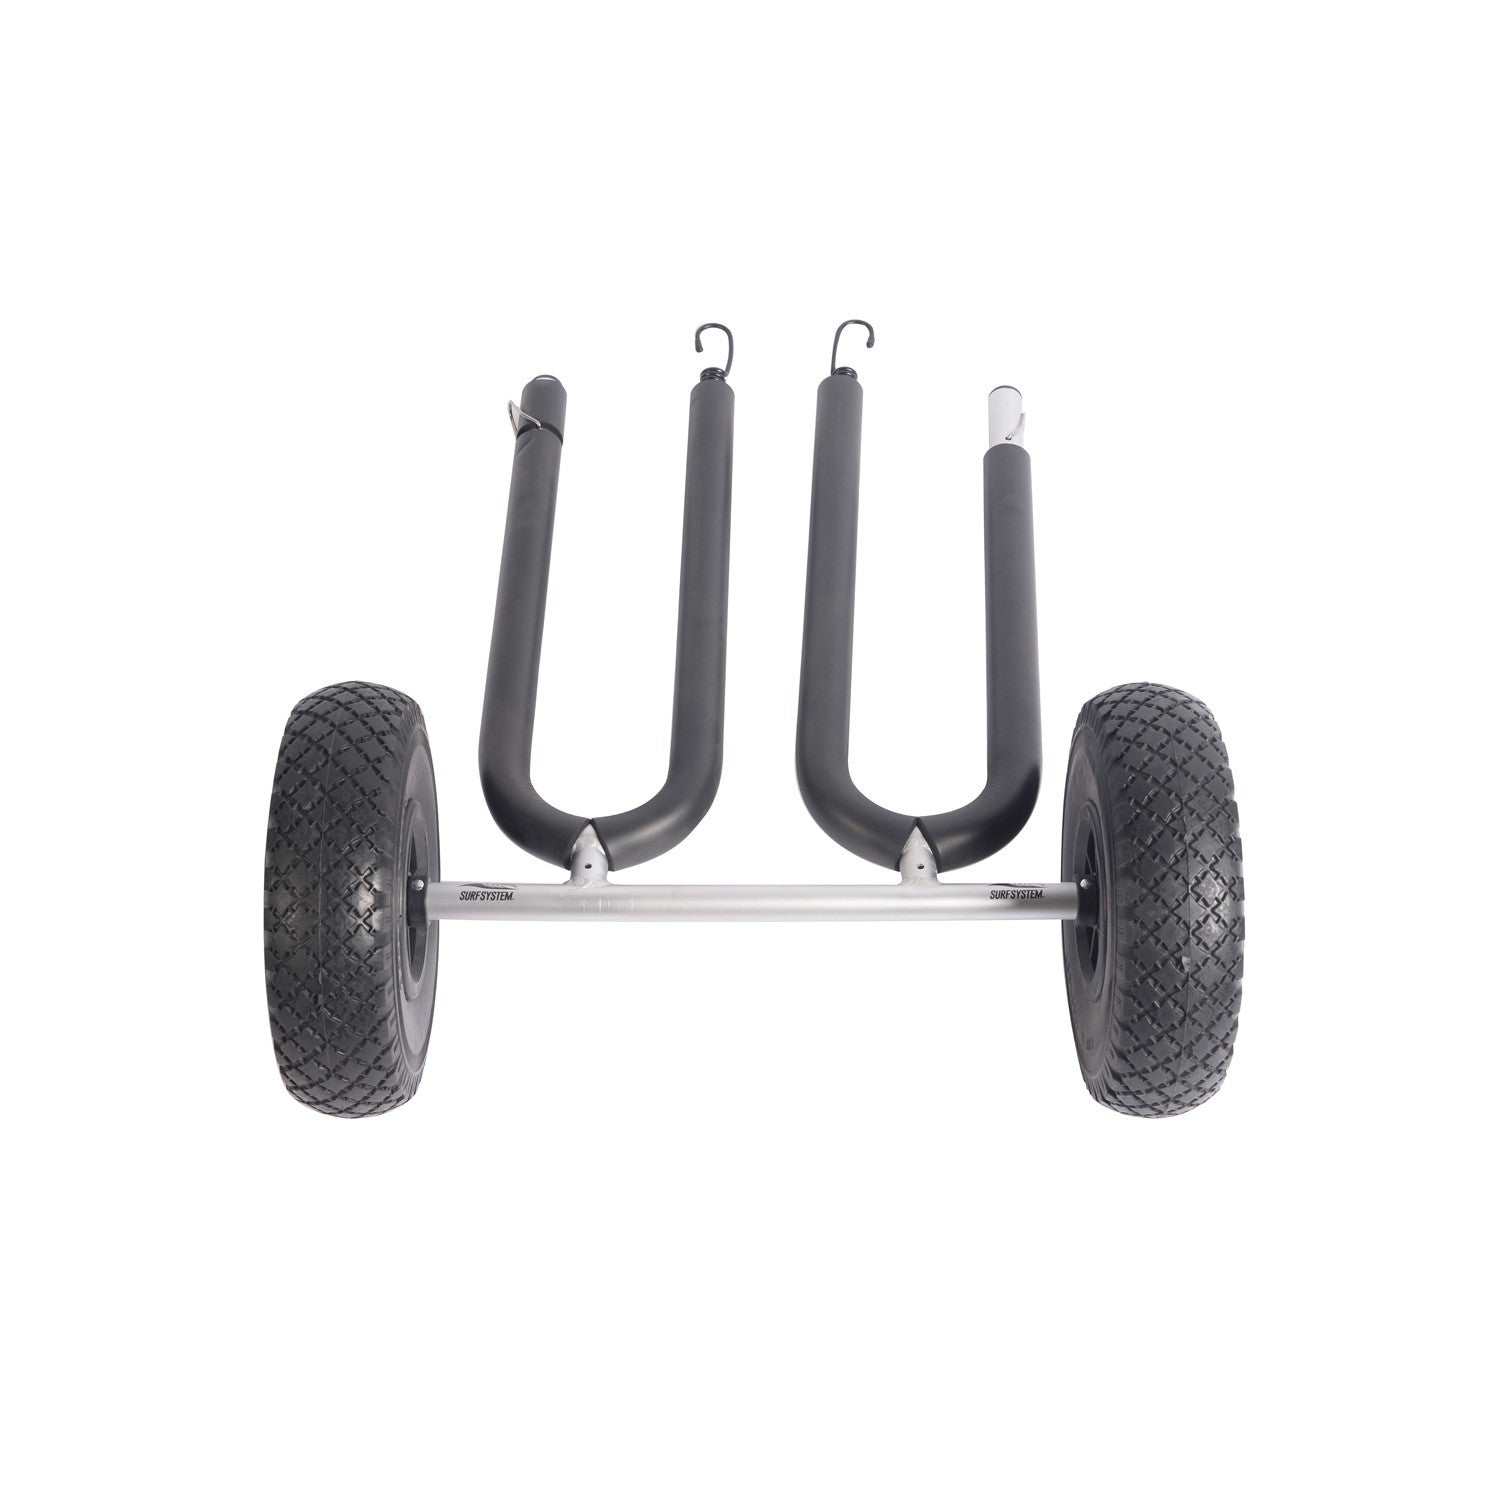 SURF SYSTEM - Double trolley for 2 Longboards / SUPs / Surfs